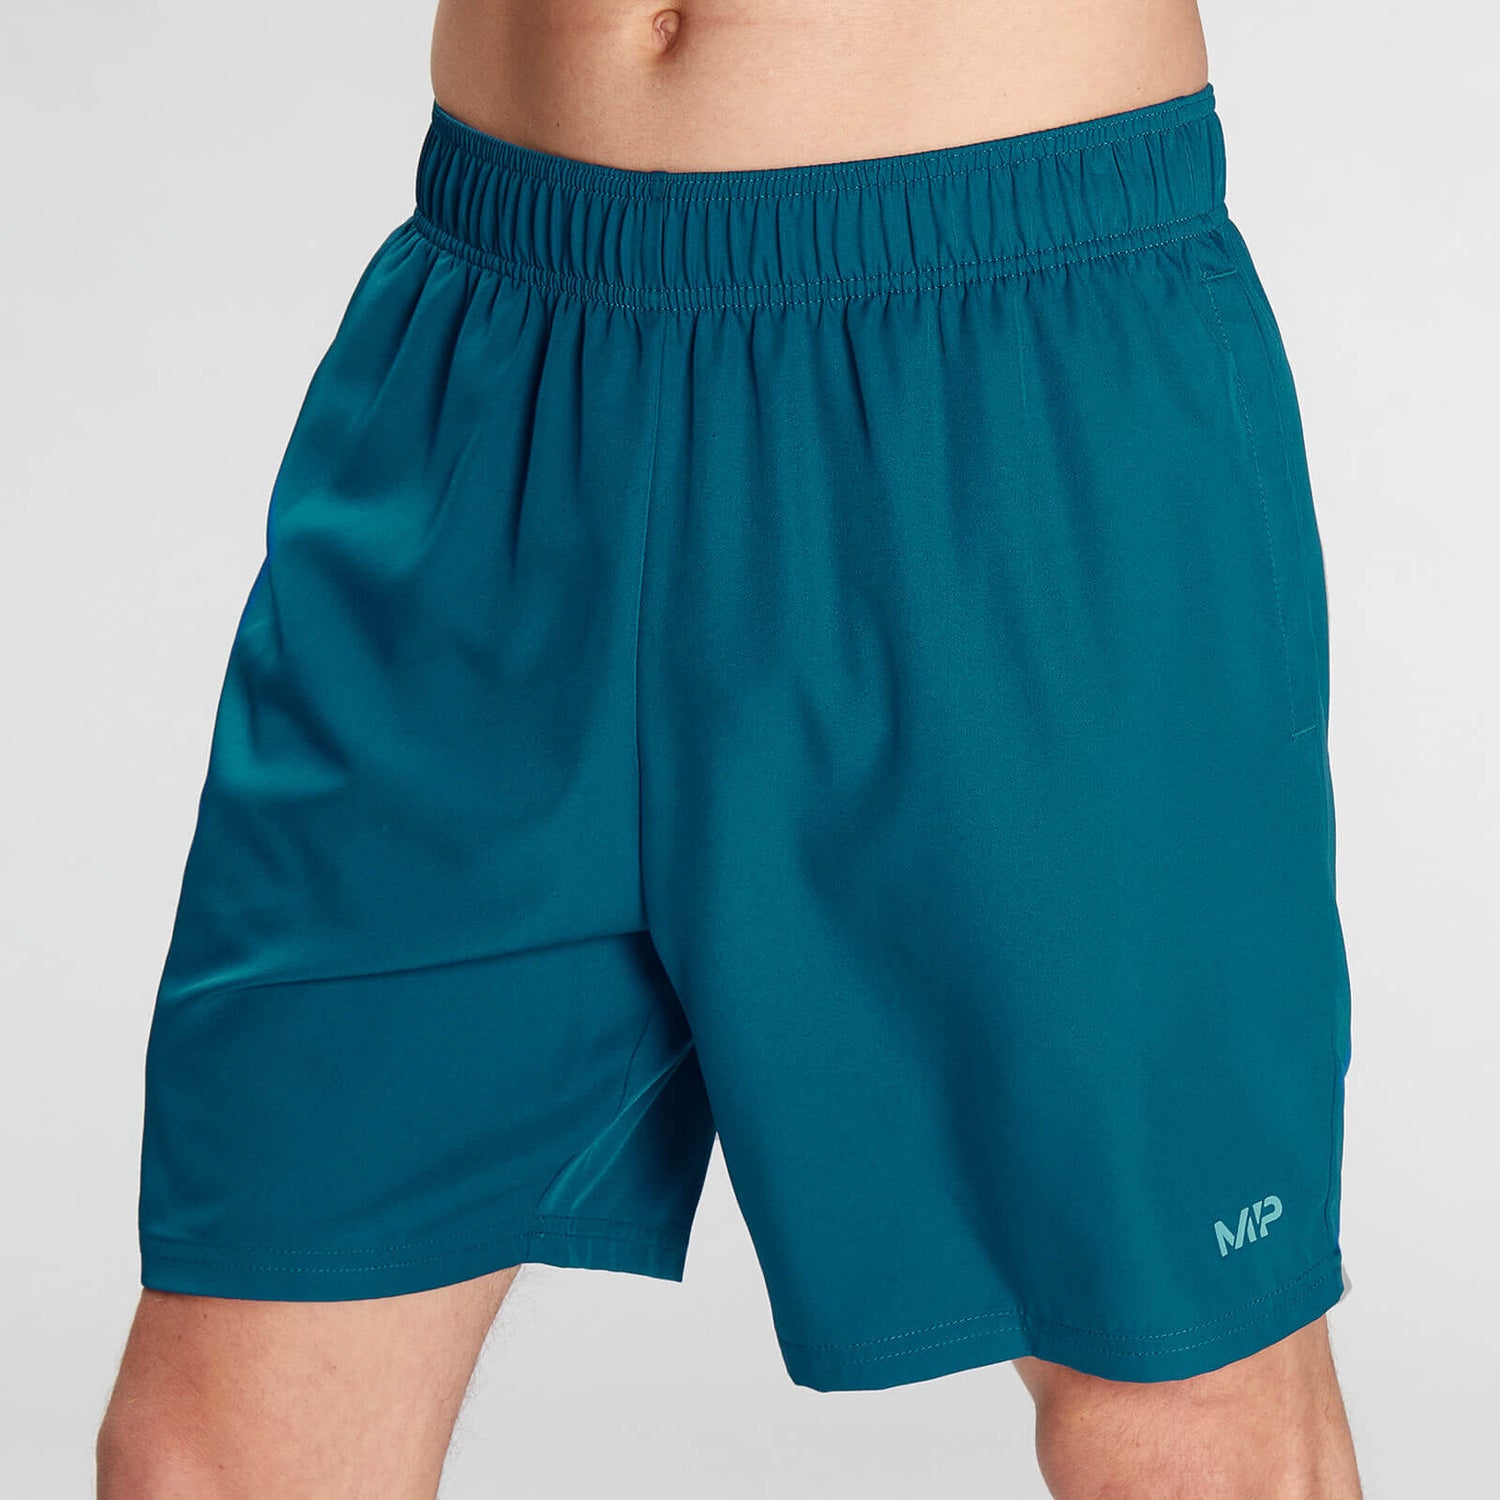 MP Men's Limited Edition Impact Shorts - Teal - XXS